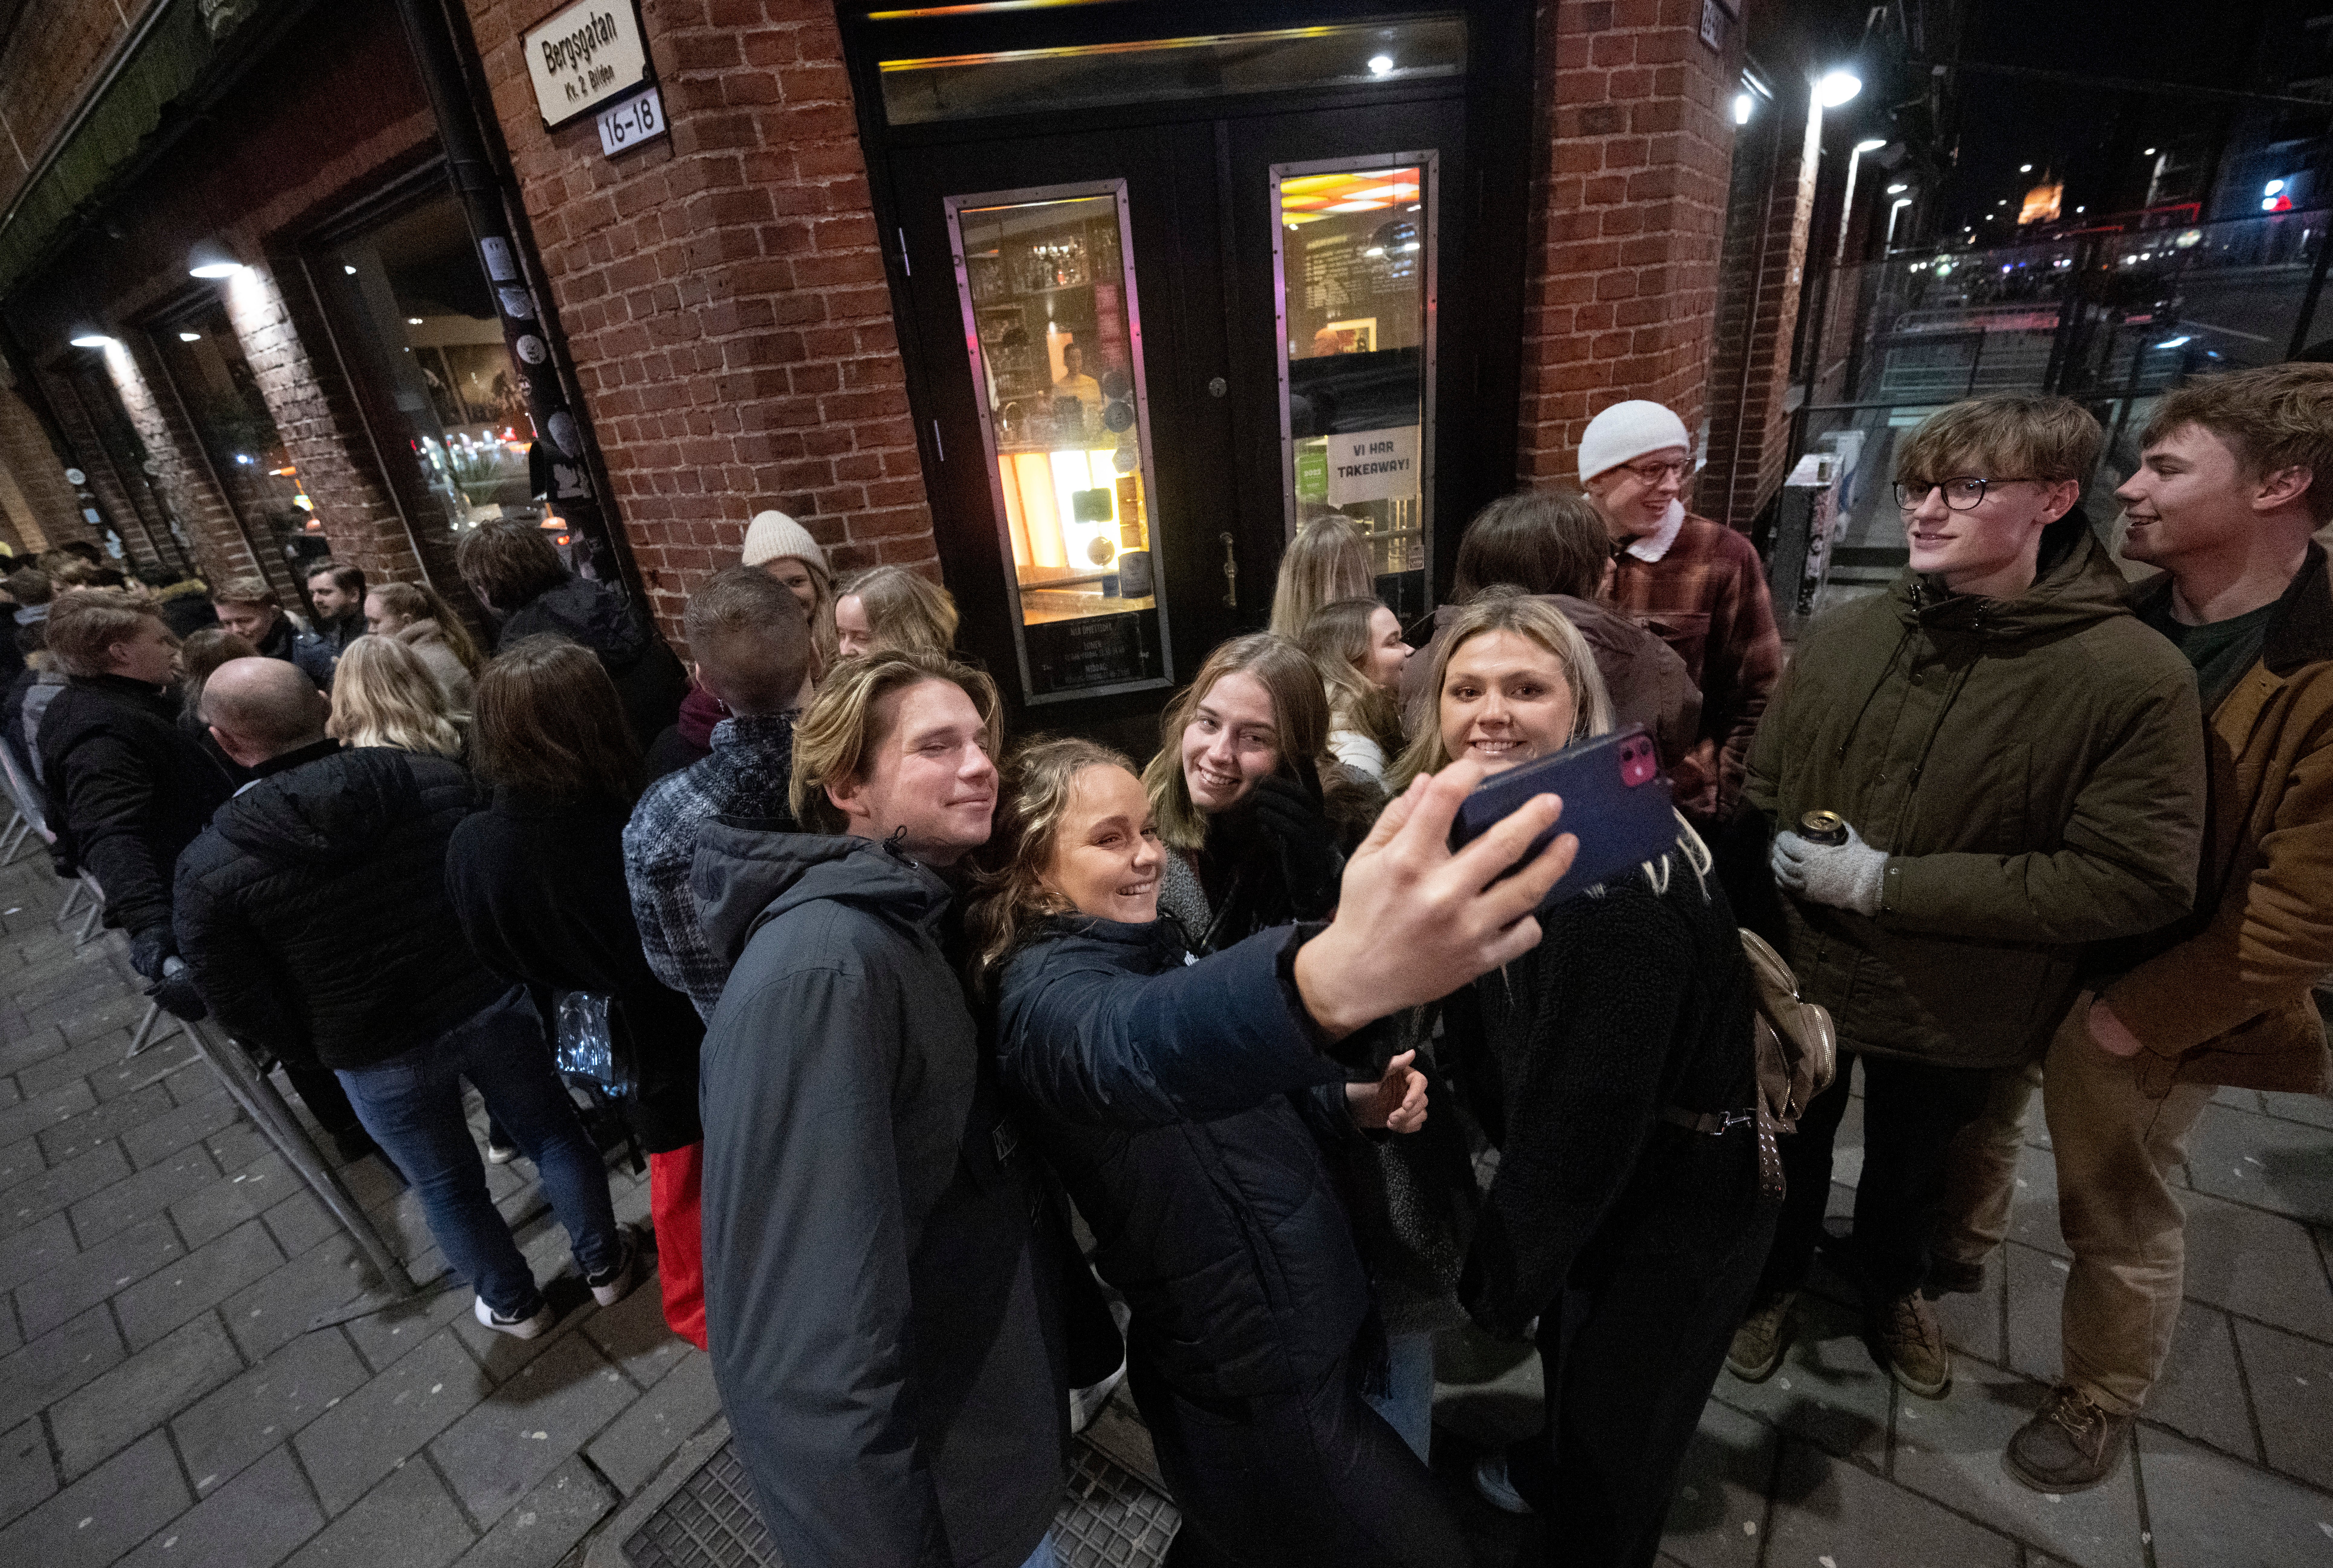 People queue outside a nightclub right after midnight in Malmo, Sweden, 9 February 2022